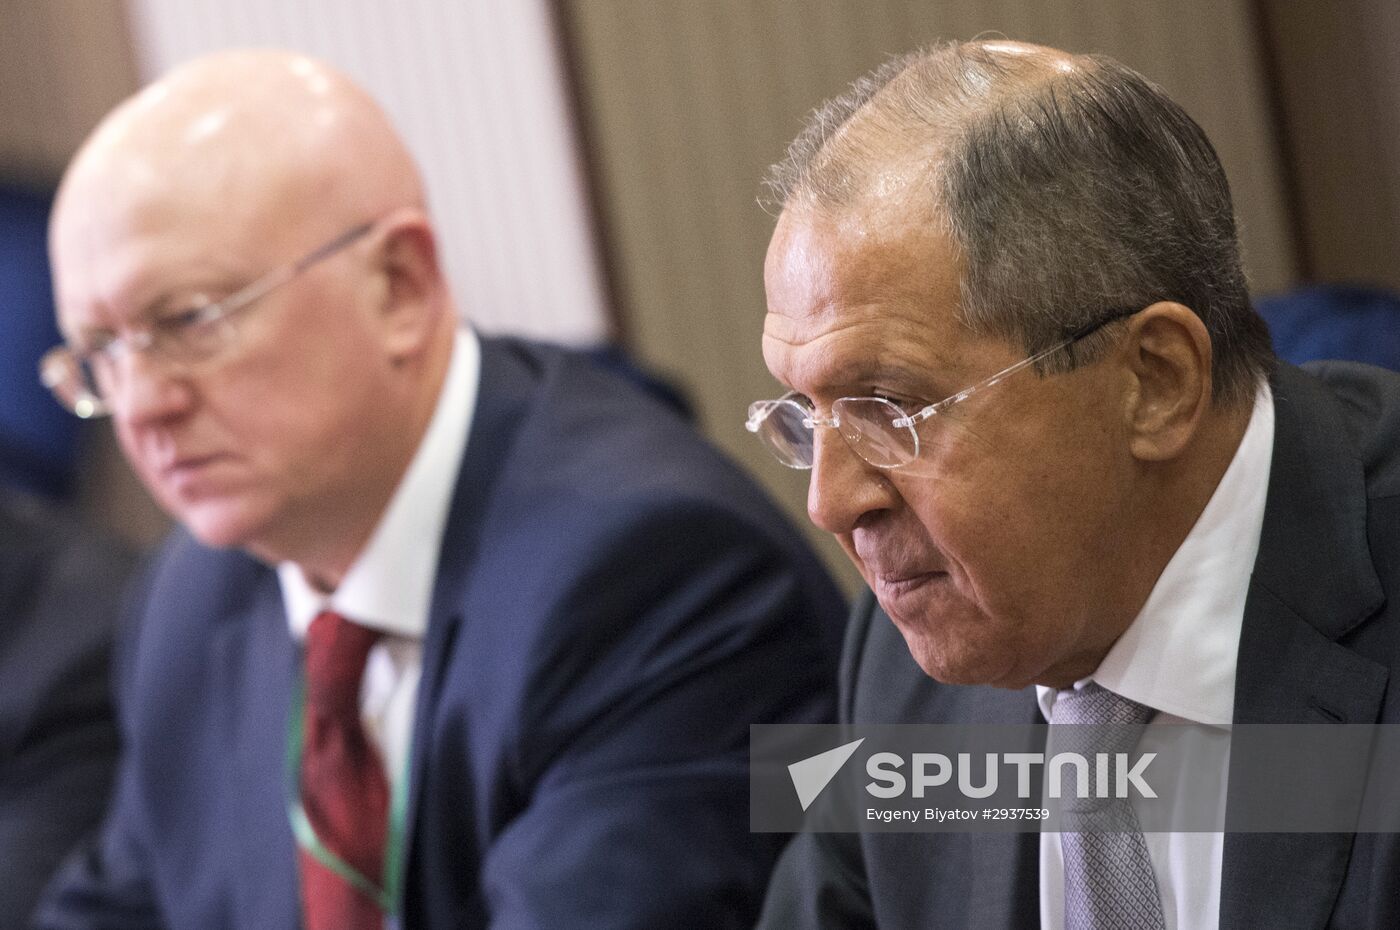 Russian Foreign Minister Sergei Lavrov takes part in CIS Council of Foreign Ministers